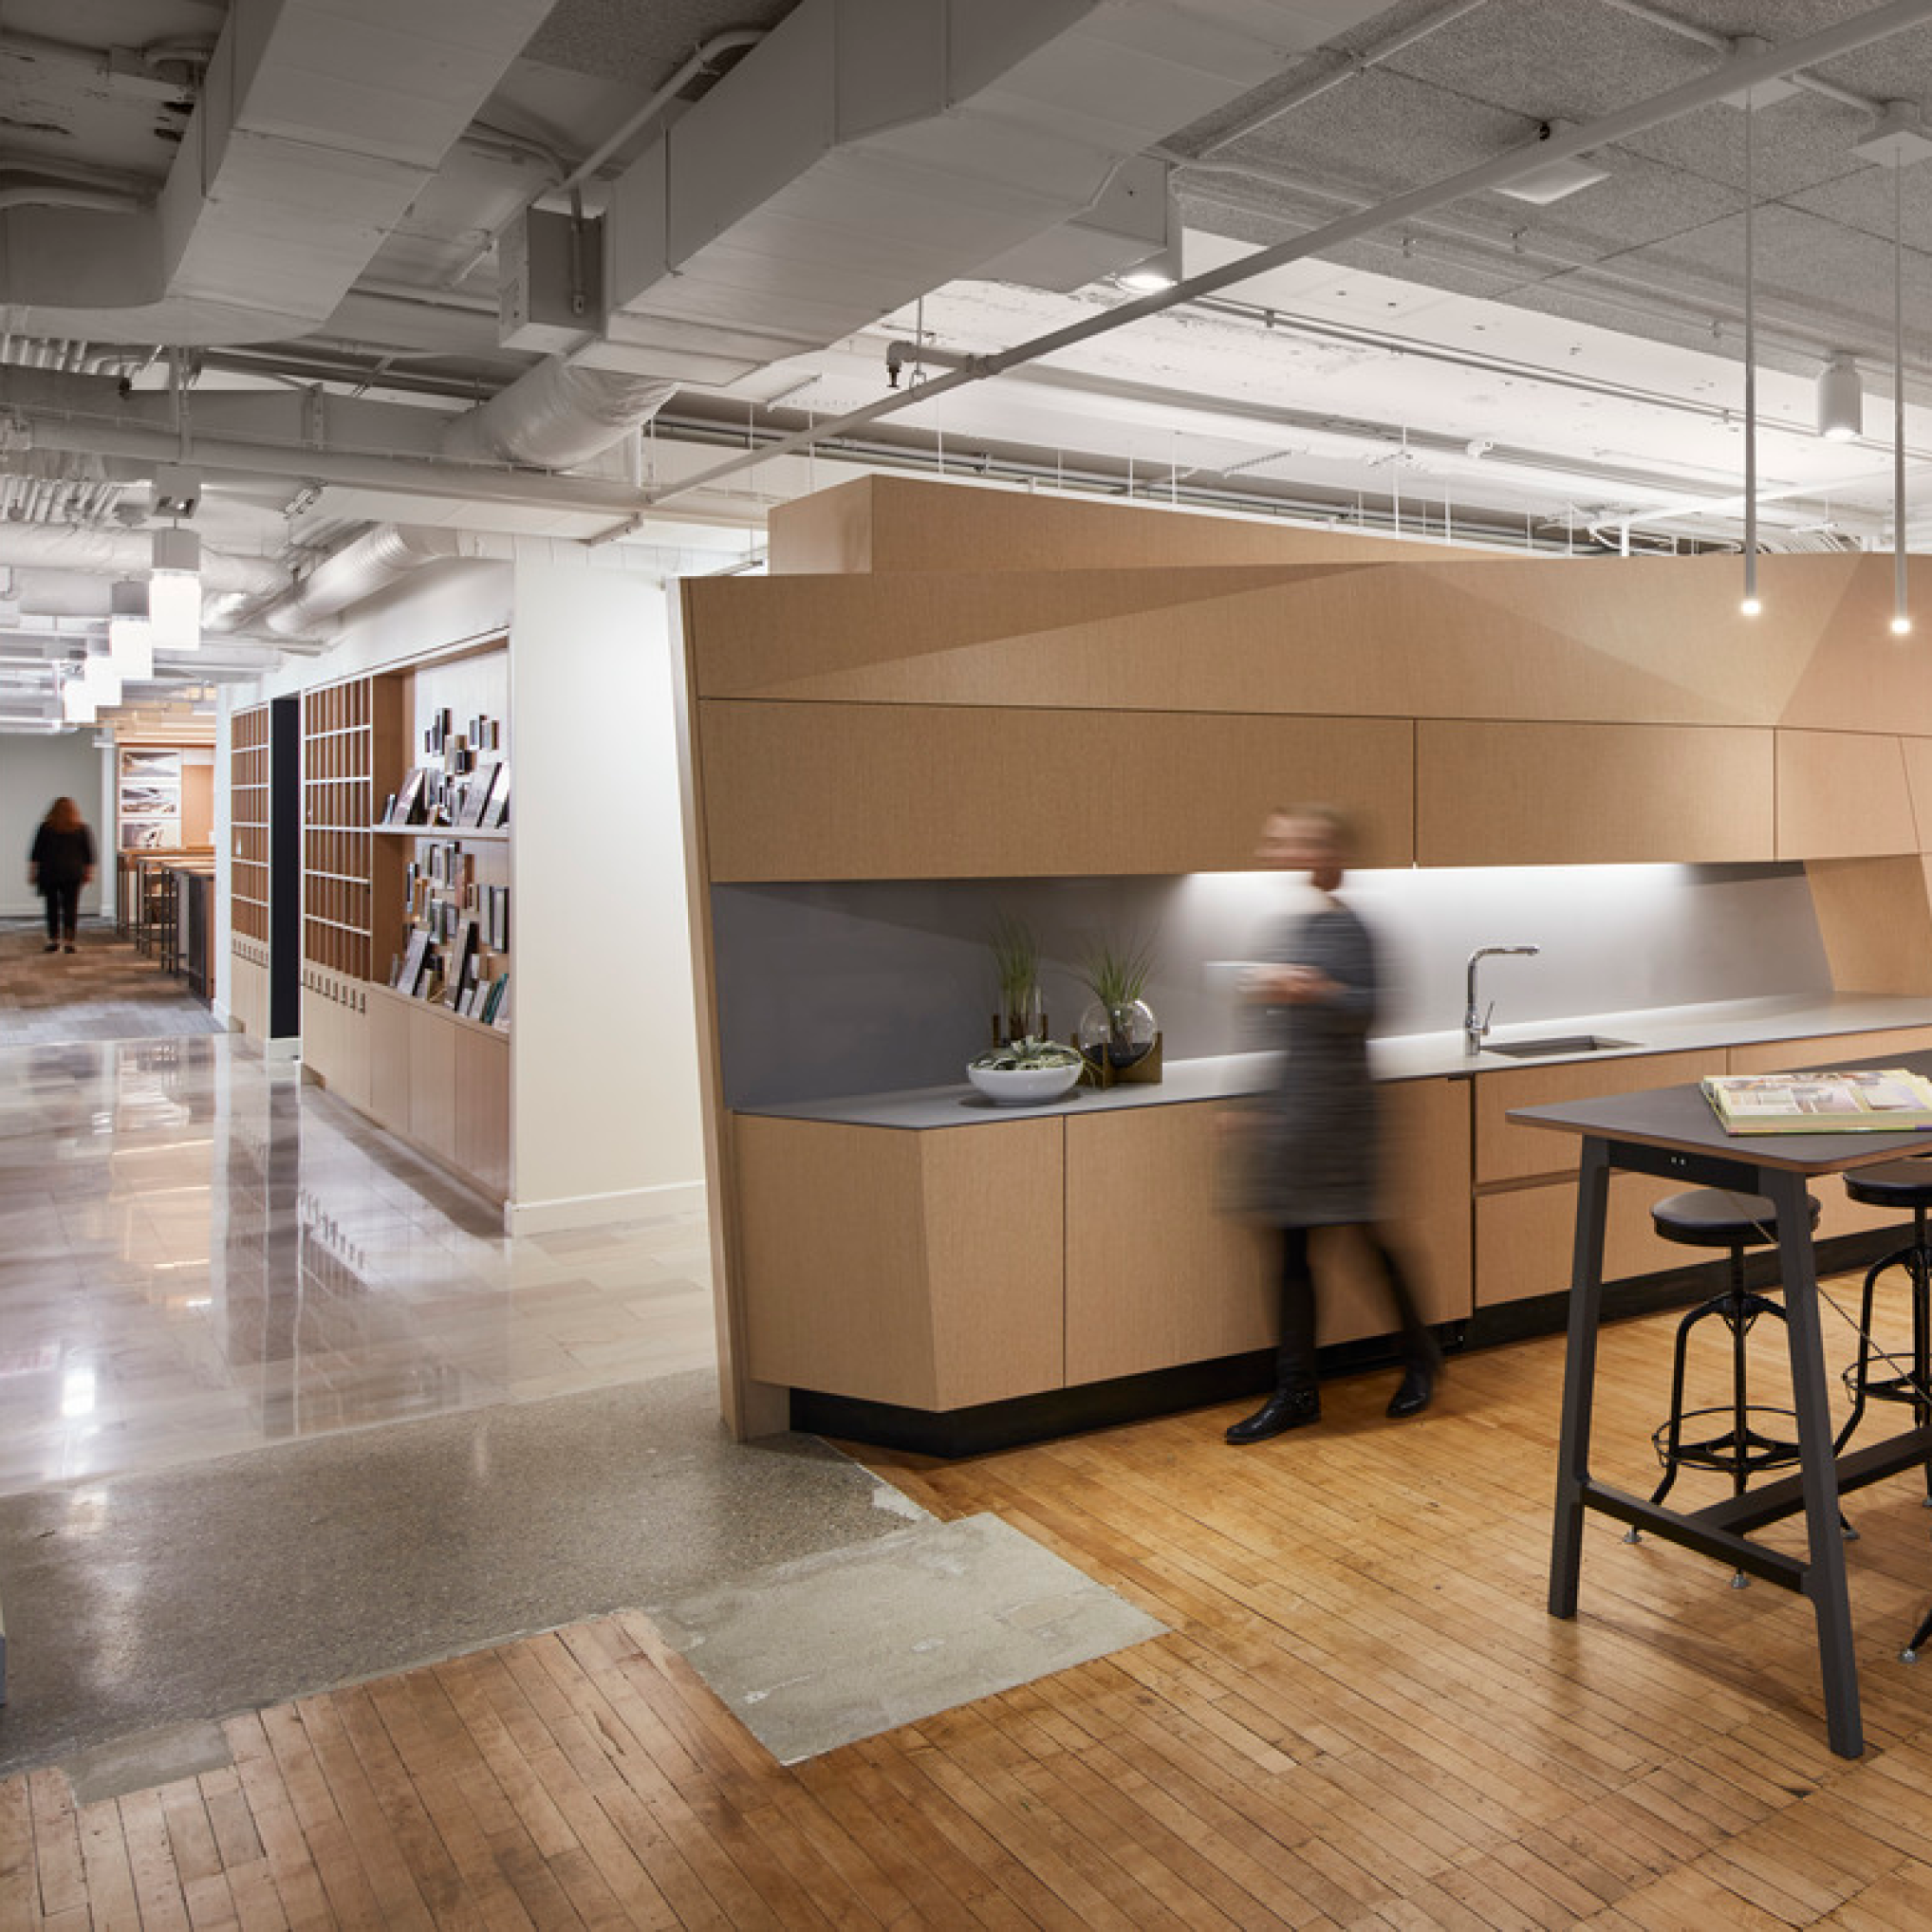 HKS’ Chicago Office, a Living Lab, Realizes Measurable Value through Design for WELL-Being